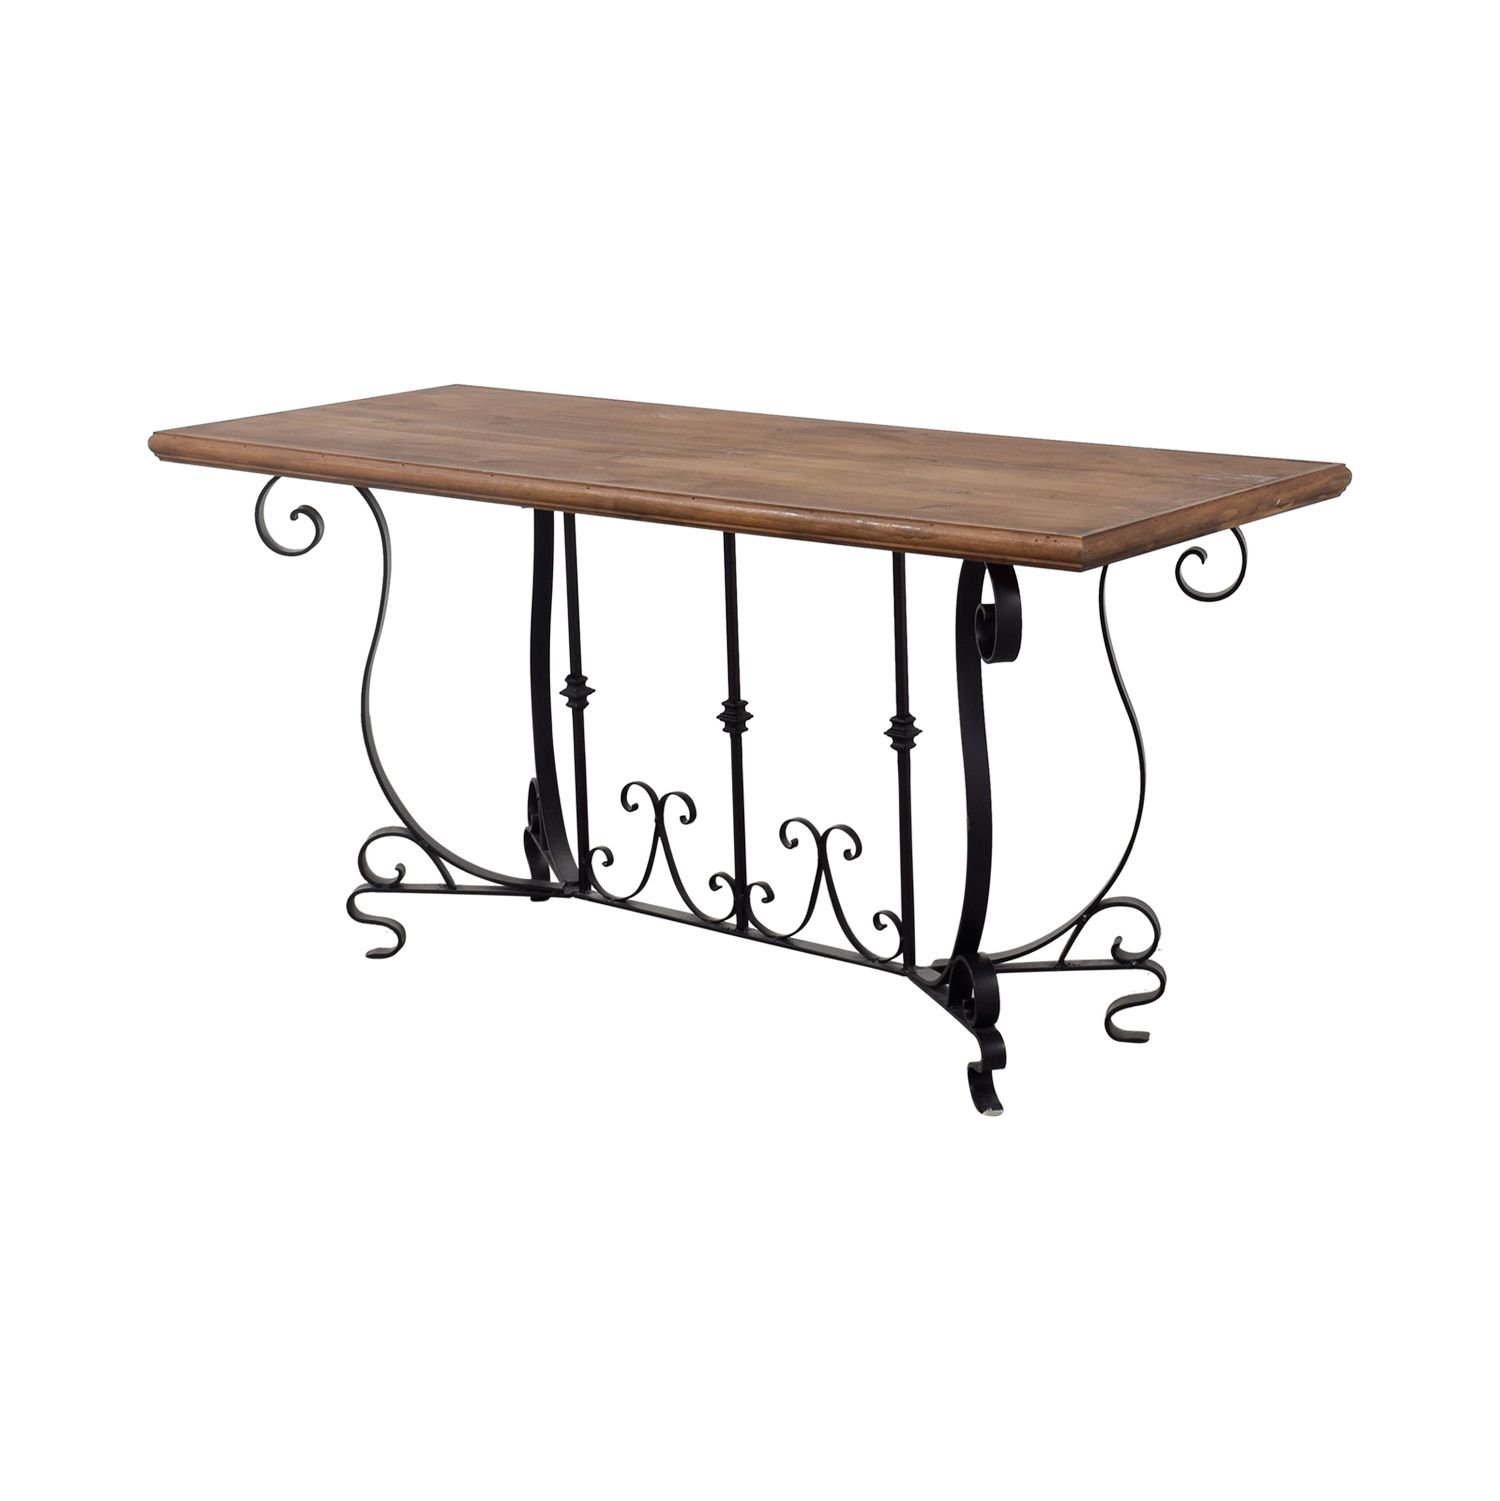 [%90% Off – Black Iron Scroll Base And Rustic Wood Console With Most Recent Aged Black Iron Console Tables|aged Black Iron Console Tables With Fashionable 90% Off – Black Iron Scroll Base And Rustic Wood Console|well Known Aged Black Iron Console Tables For 90% Off – Black Iron Scroll Base And Rustic Wood Console|popular 90% Off – Black Iron Scroll Base And Rustic Wood Console In Aged Black Iron Console Tables%] (View 10 of 10)